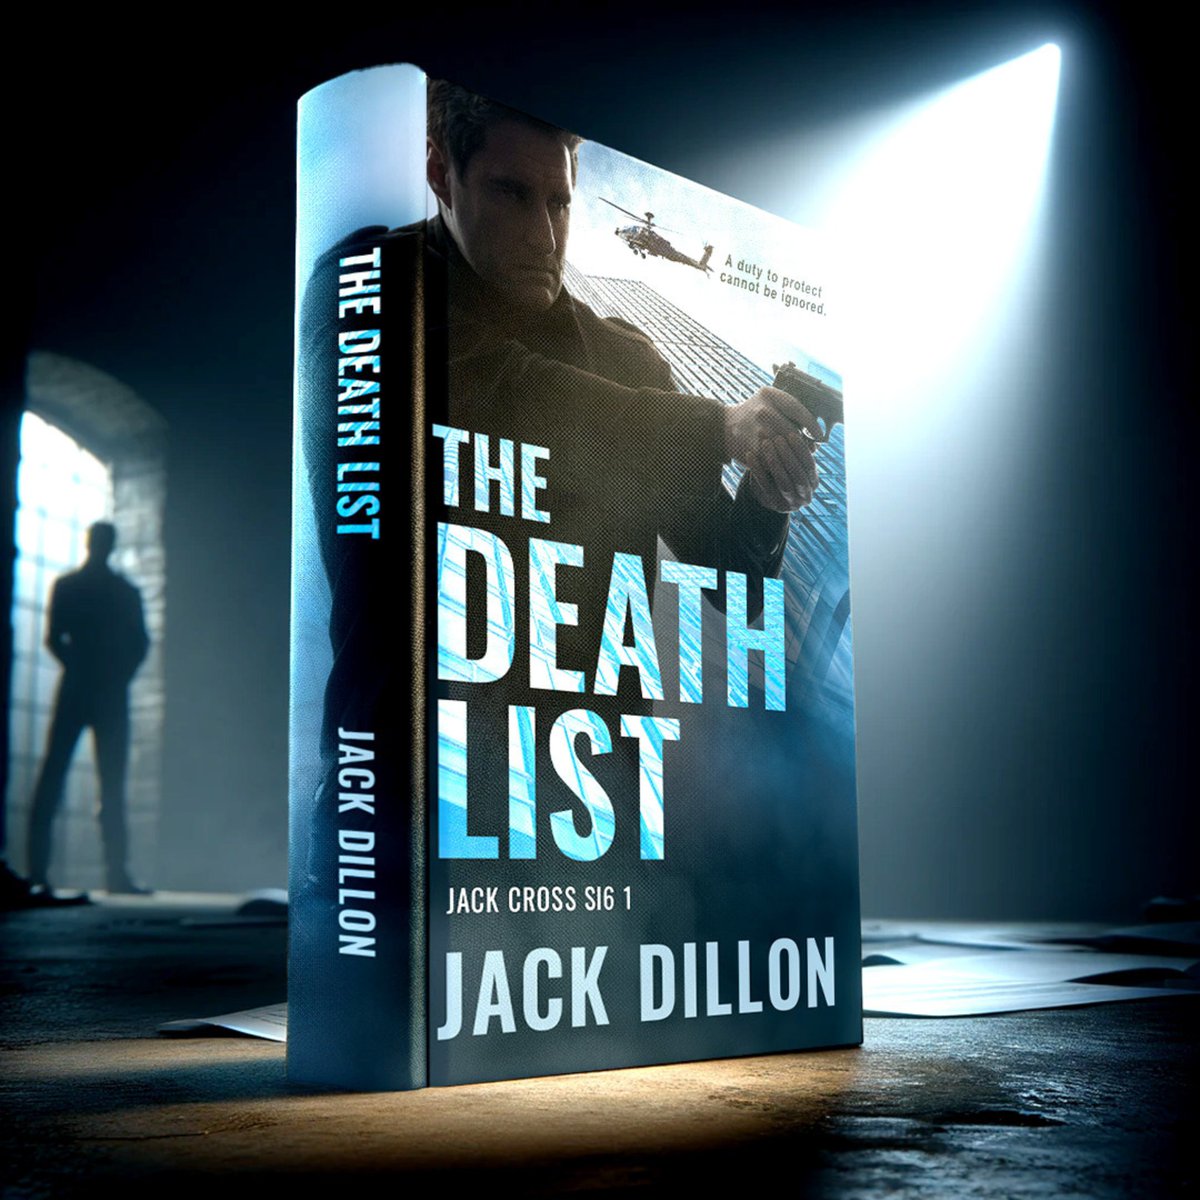 'The Death List' throws Jack Cross back into the shadows to stop a leak that could cost lives. In a race against time, can he save the day or will the death list claim its next victim?  

Available on Amazon #SpyThriller #ActionPacked